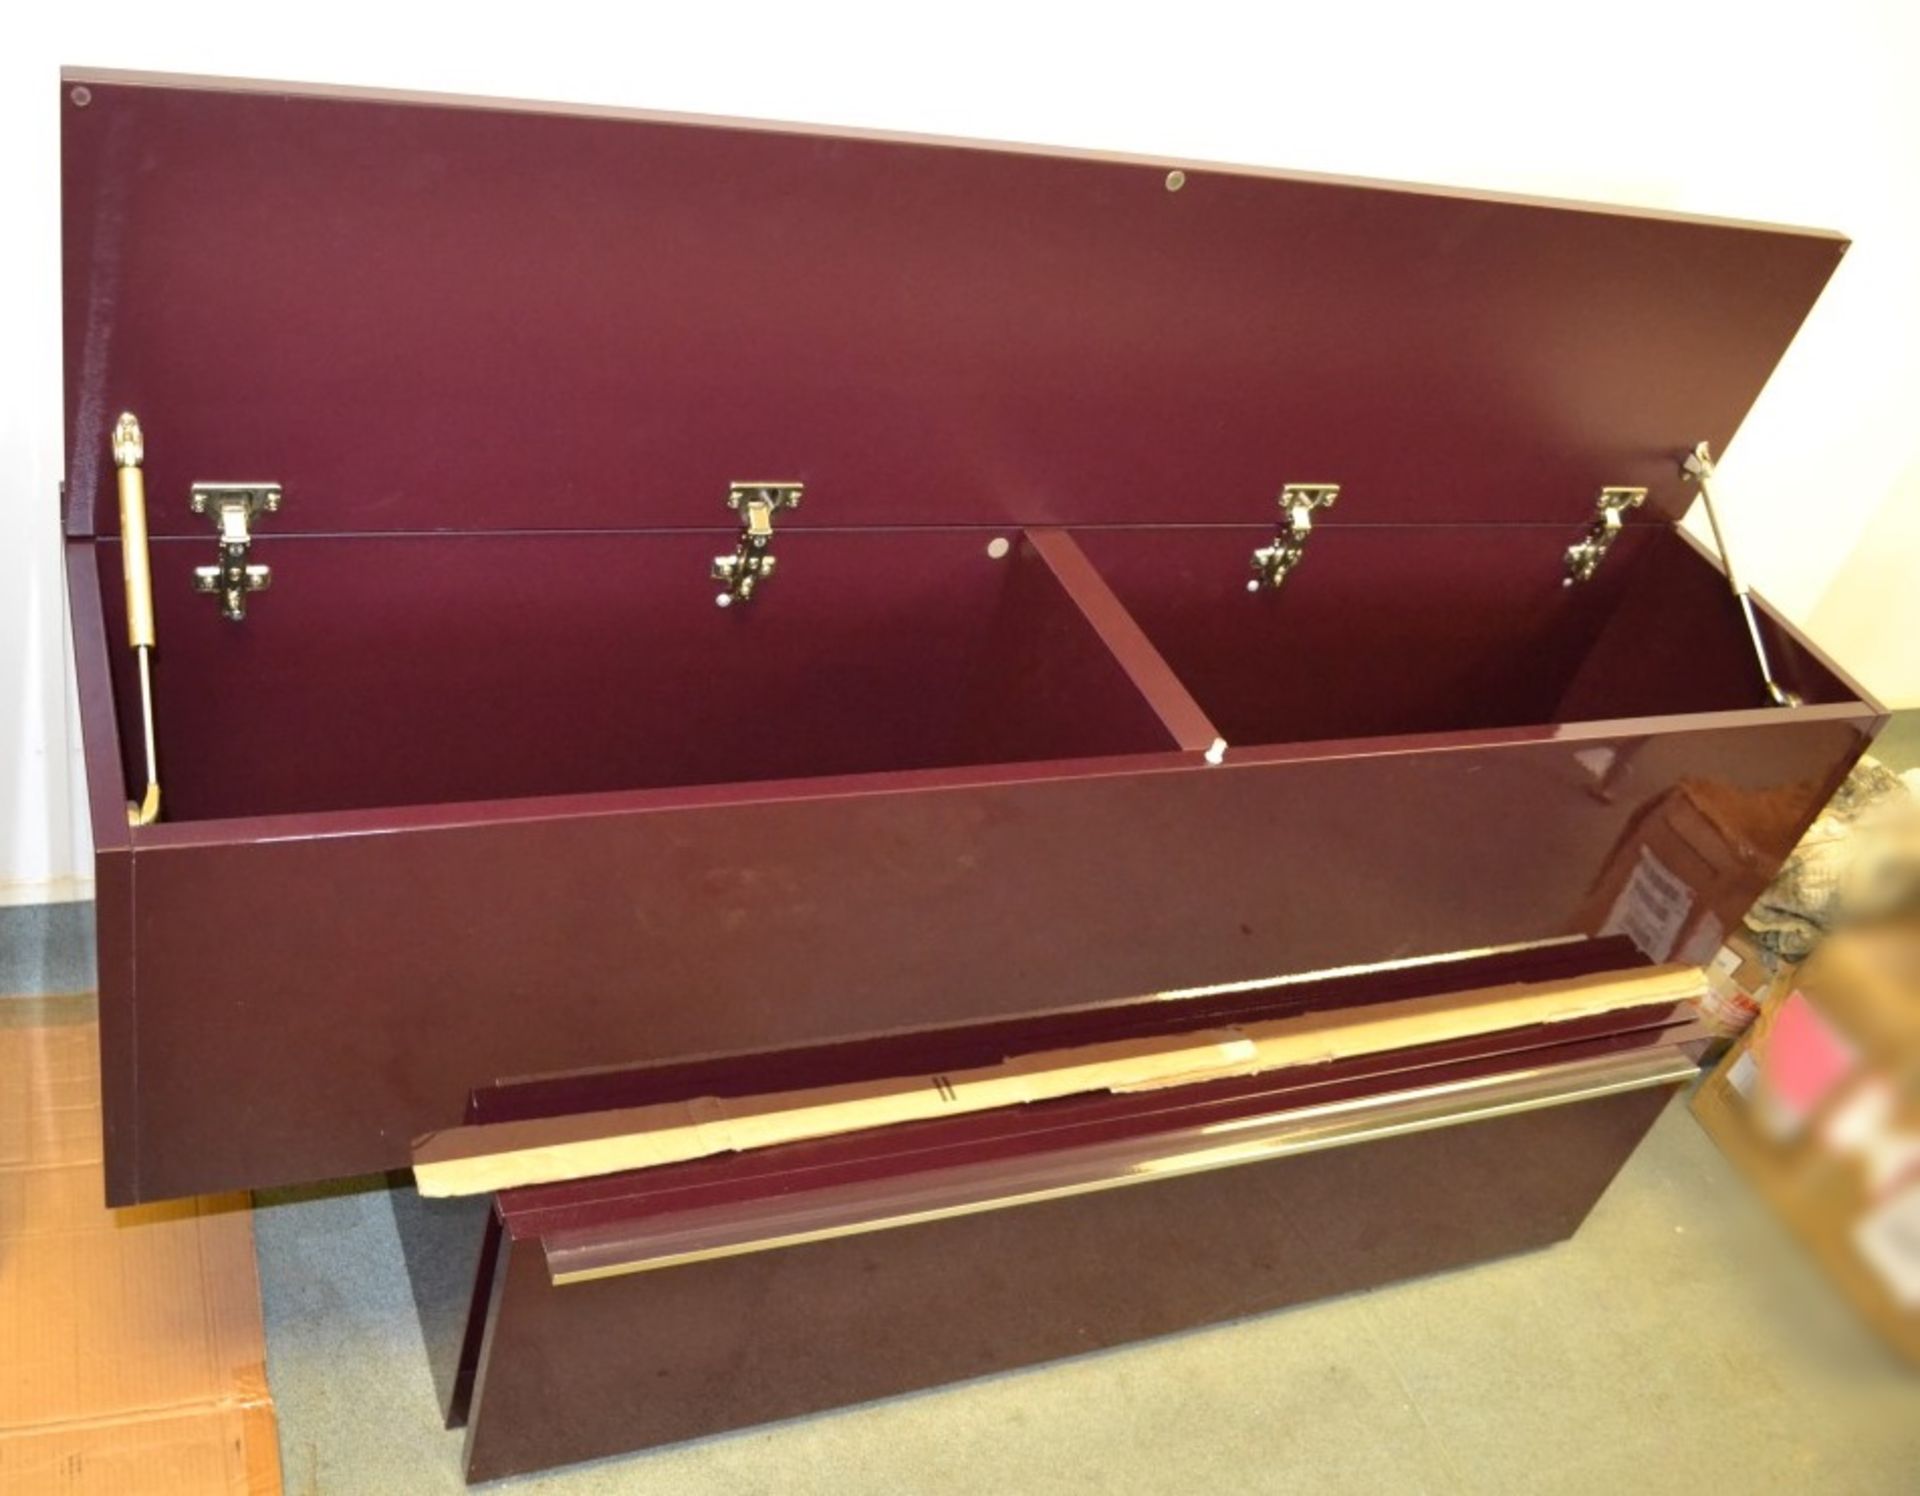 3-Piece Floating Wall Storage, Consisting Of 2 x Purple Gloss Cabinets And 1 x Large Wooden Shelf - Image 5 of 7